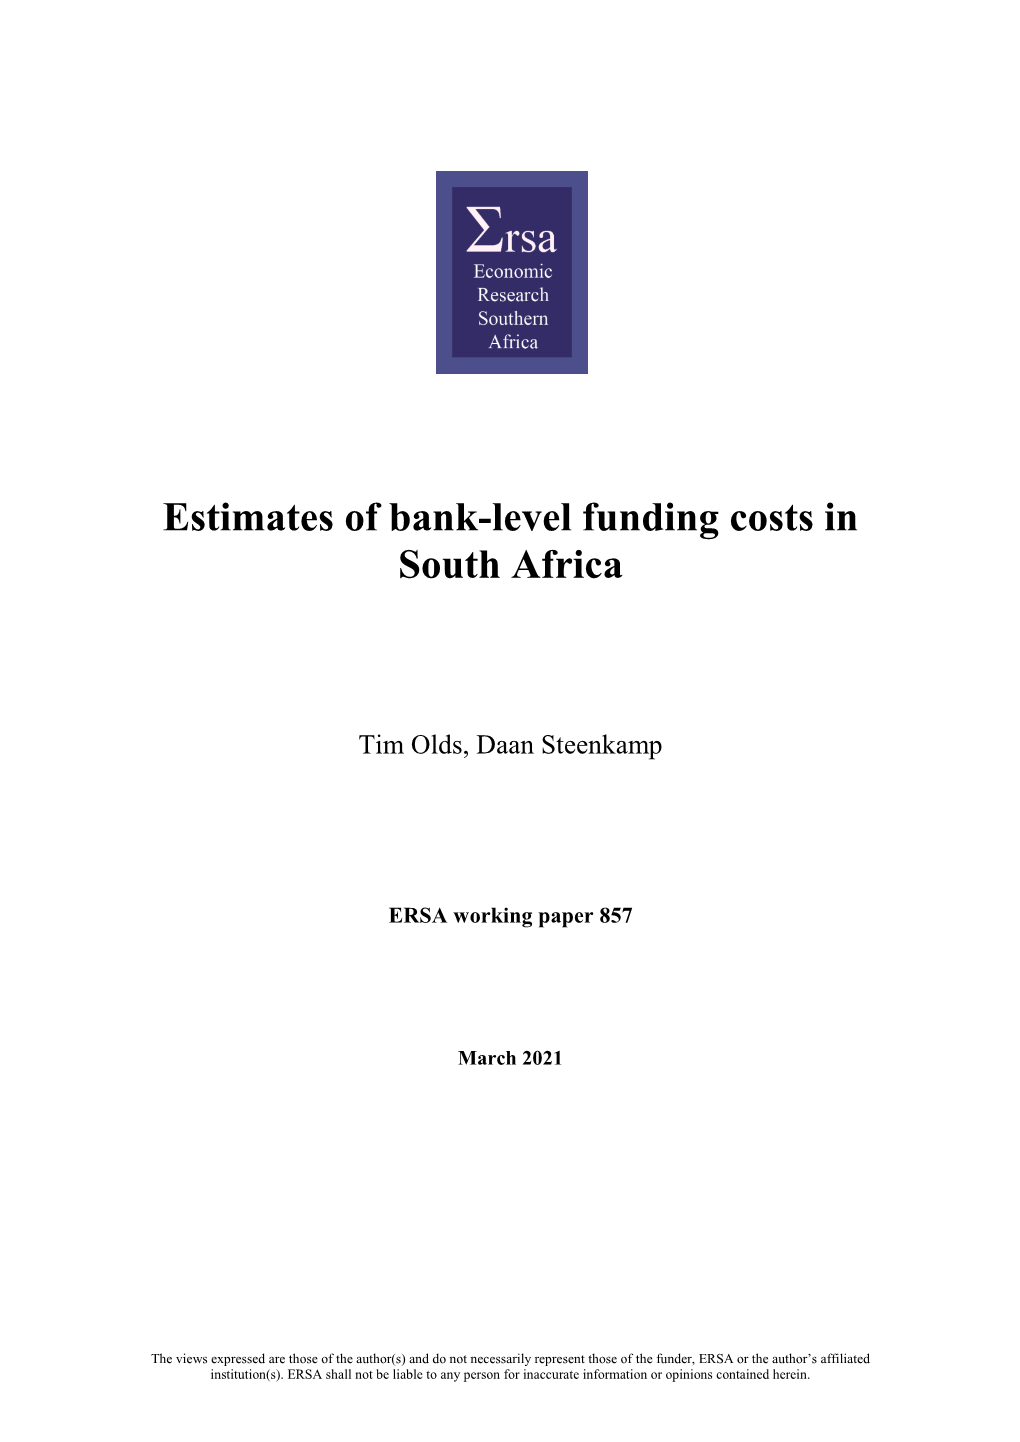 Estimates of Bank-Level Funding Costs in South Africa